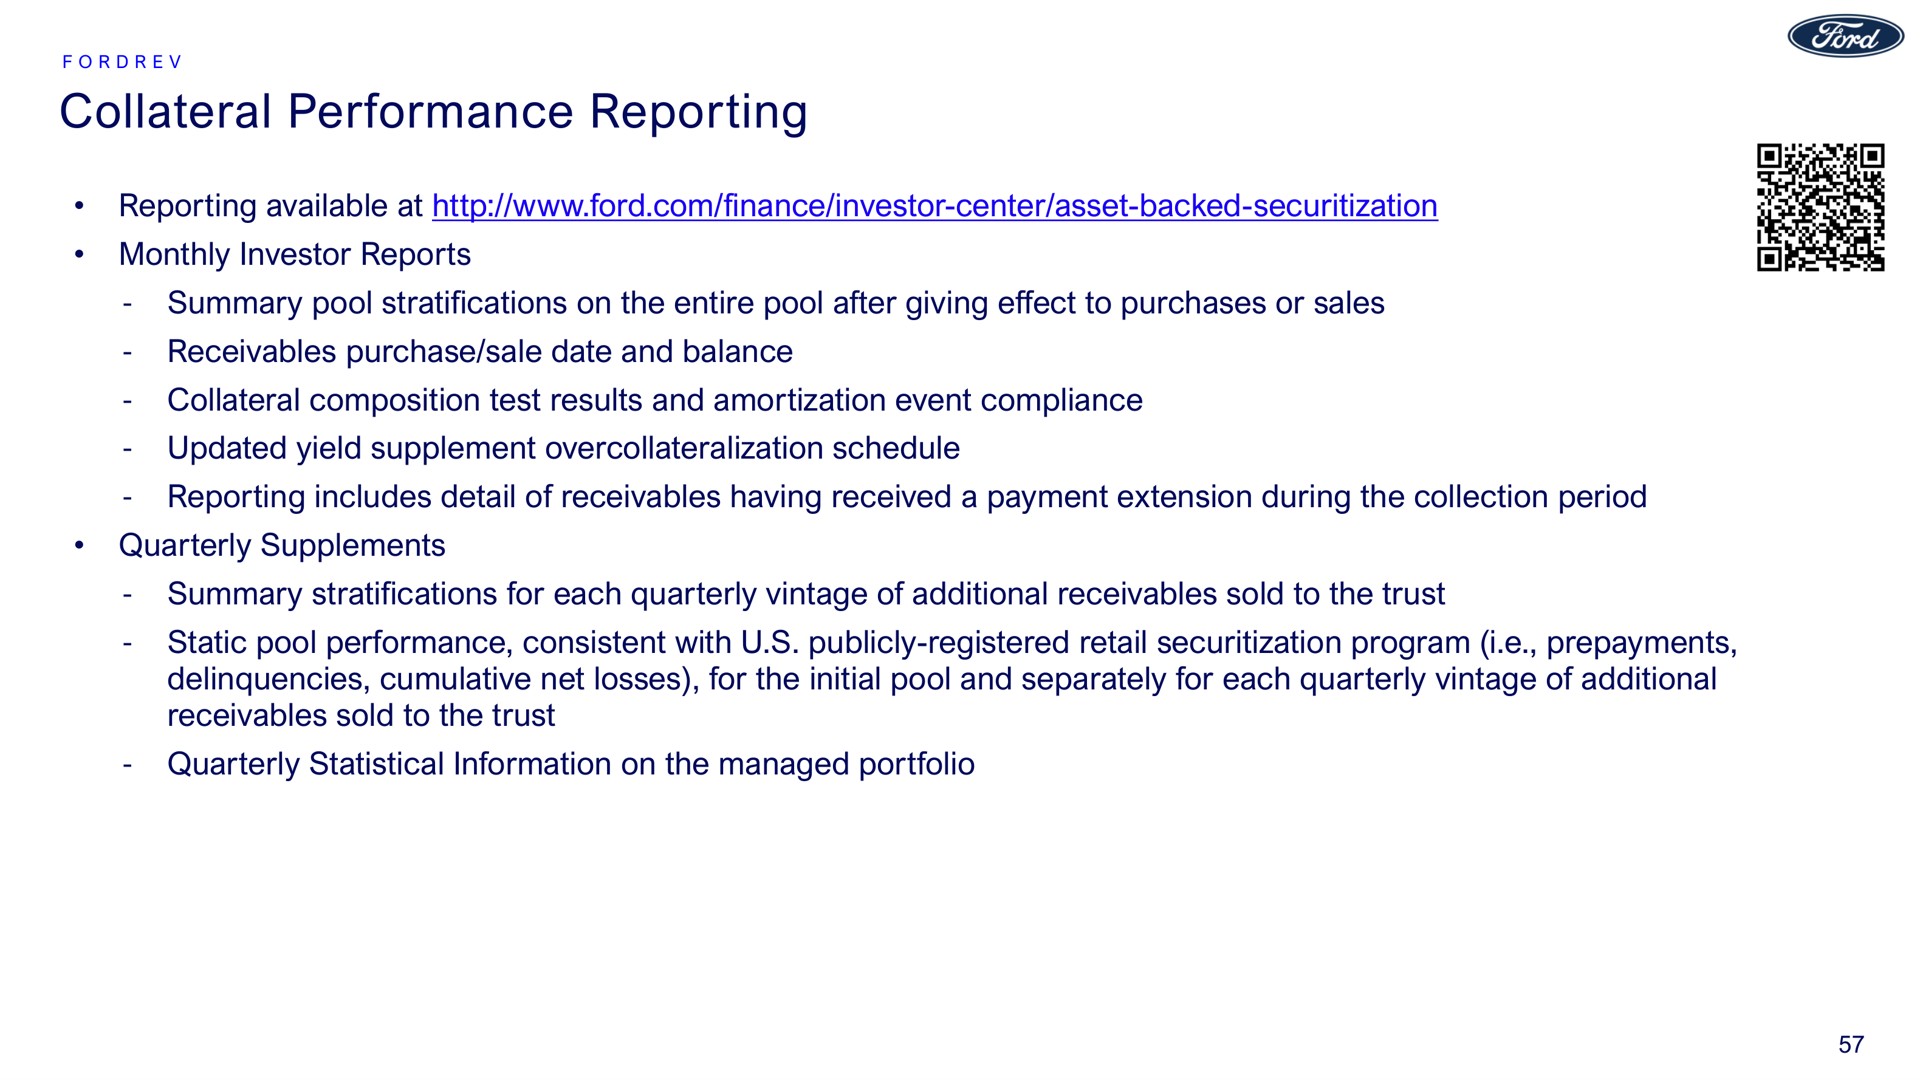 collateral performance reporting reporting available at monthly investor reports summary pool stratifications on the entire pool after giving effect to purchases or sales receivables purchase sale date and balance collateral composition test results and amortization event compliance updated yield supplement schedule reporting includes detail of receivables having received a payment extension during the collection period quarterly supplements summary stratifications for each quarterly vintage of additional receivables sold to the trust static pool performance consistent with publicly registered retail program i prepayments delinquencies cumulative net losses for the initial pool and separately for each quarterly vintage of additional receivables sold to the trust quarterly statistical information on the managed portfolio | Ford